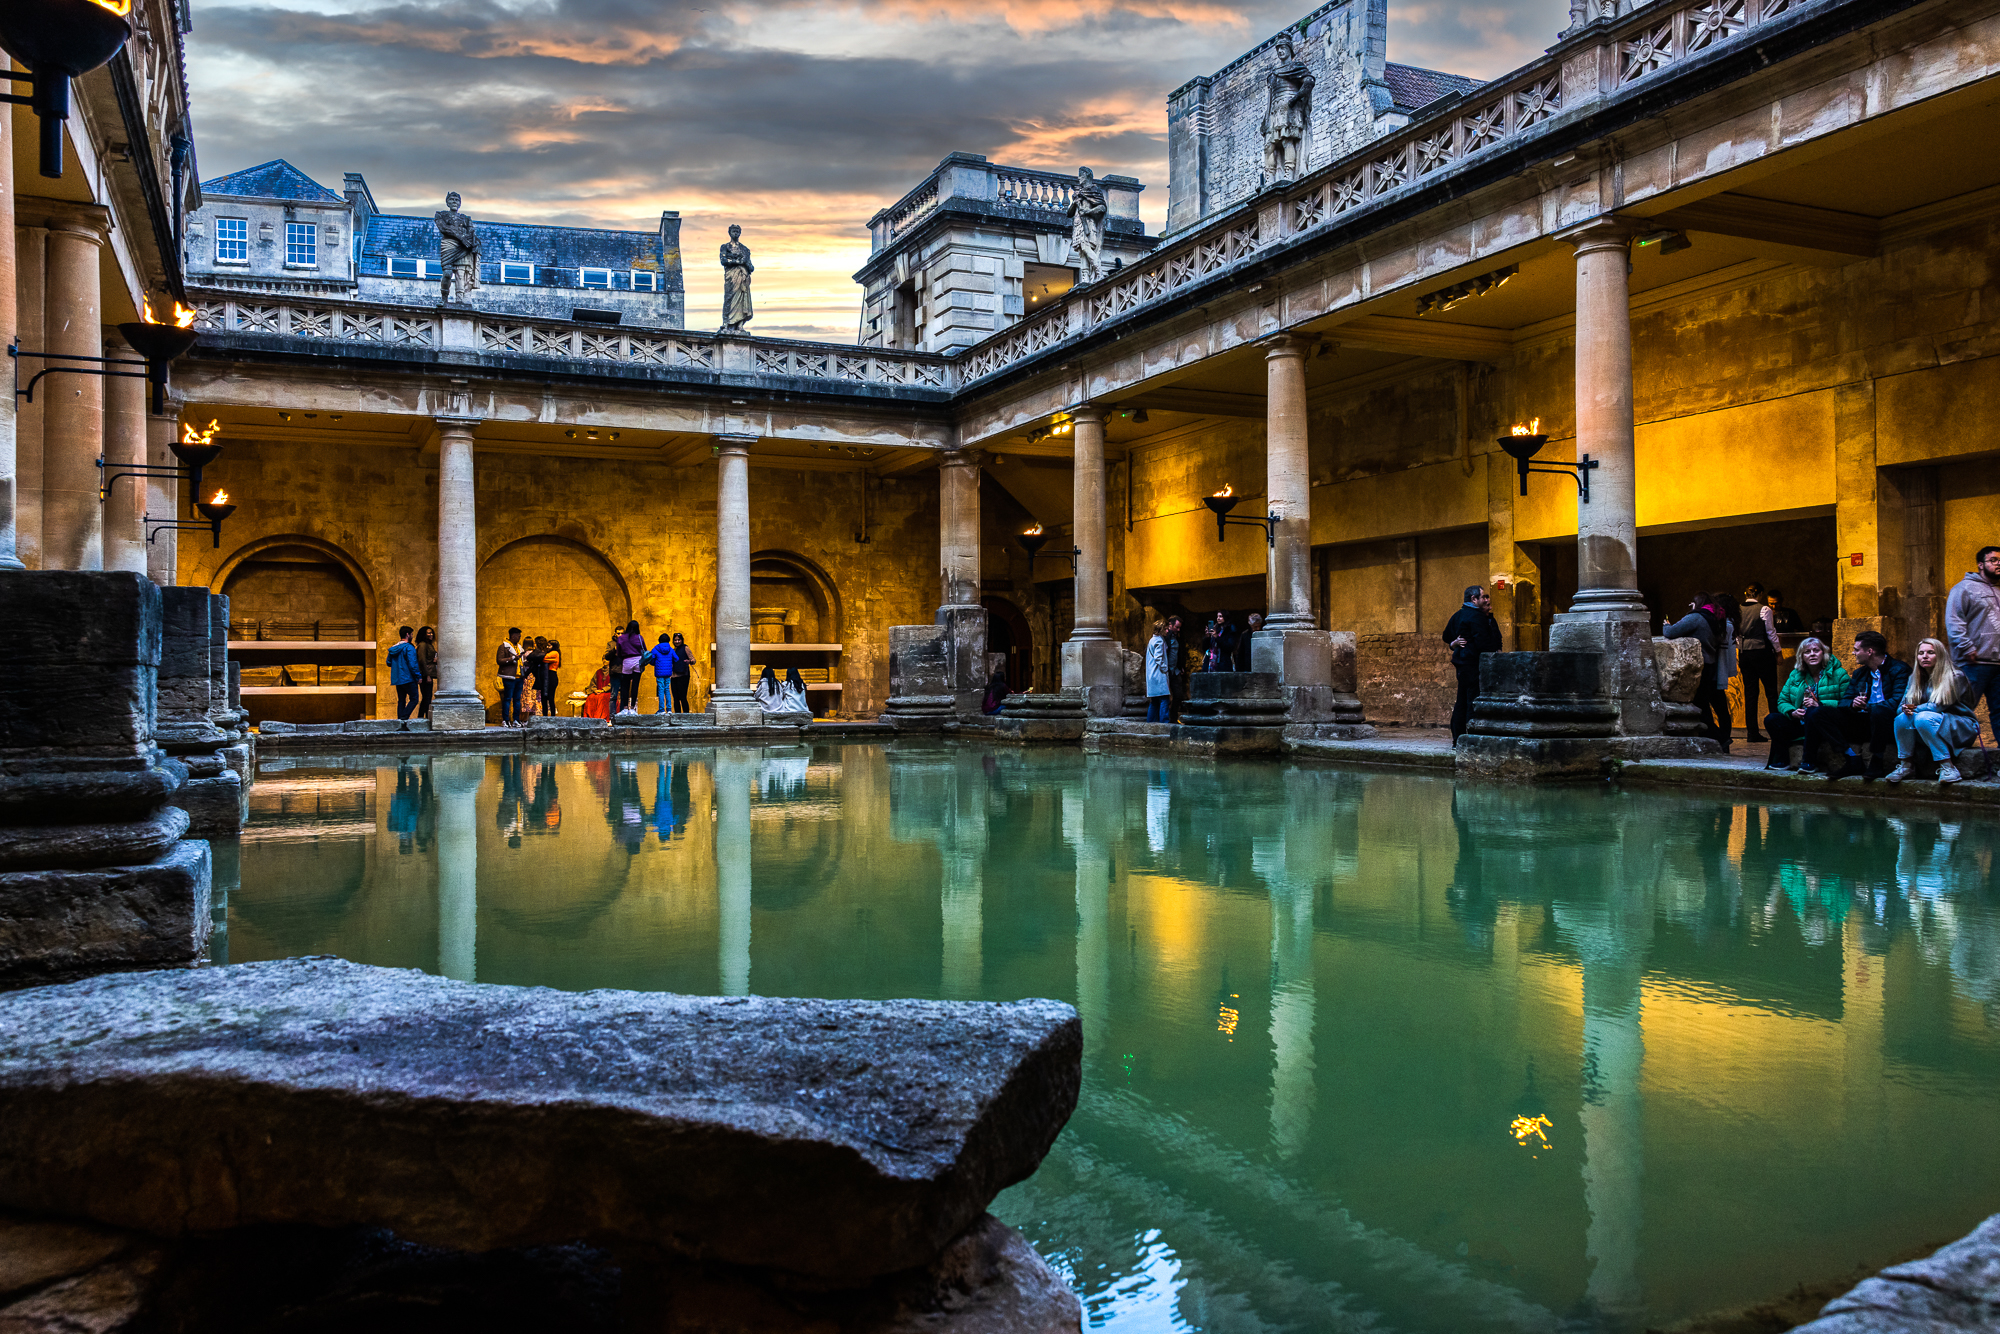 The Great Bath illuminated by torchlight in the summer